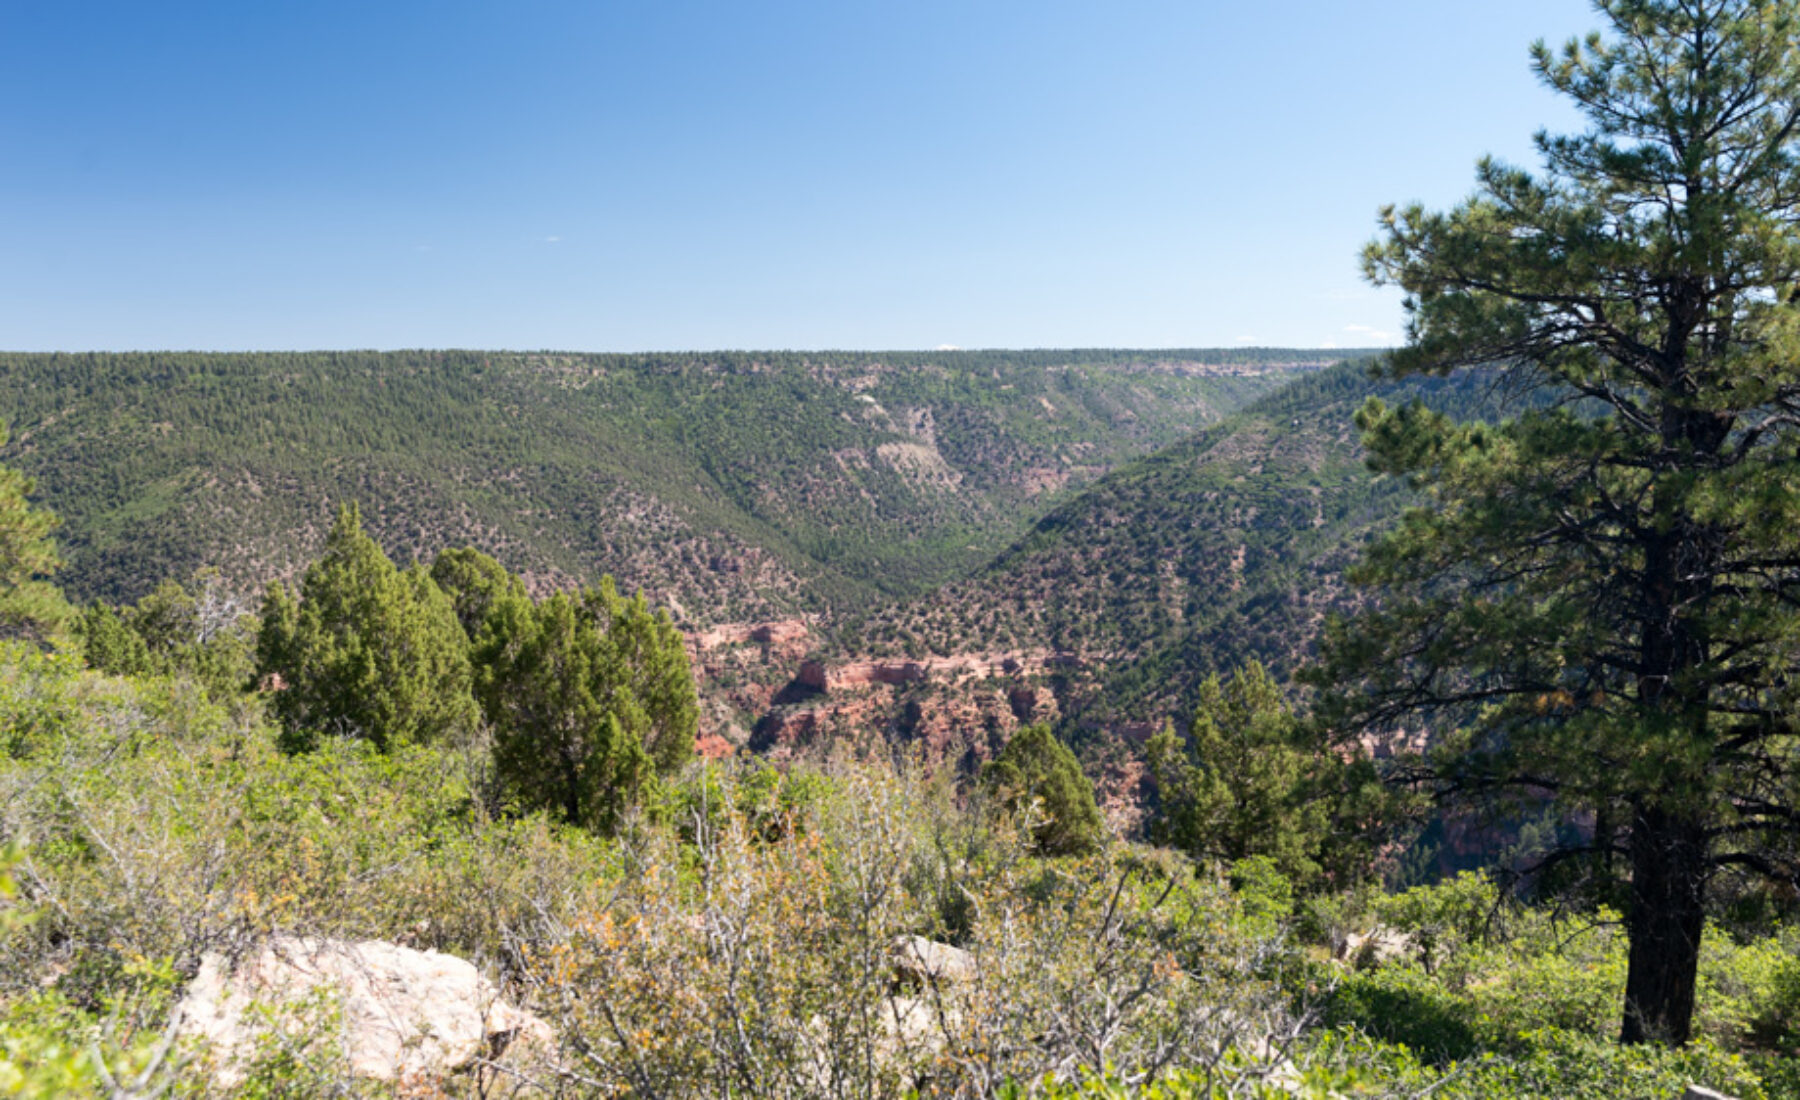 2014-09-03 Dolores Canyon River Overlook